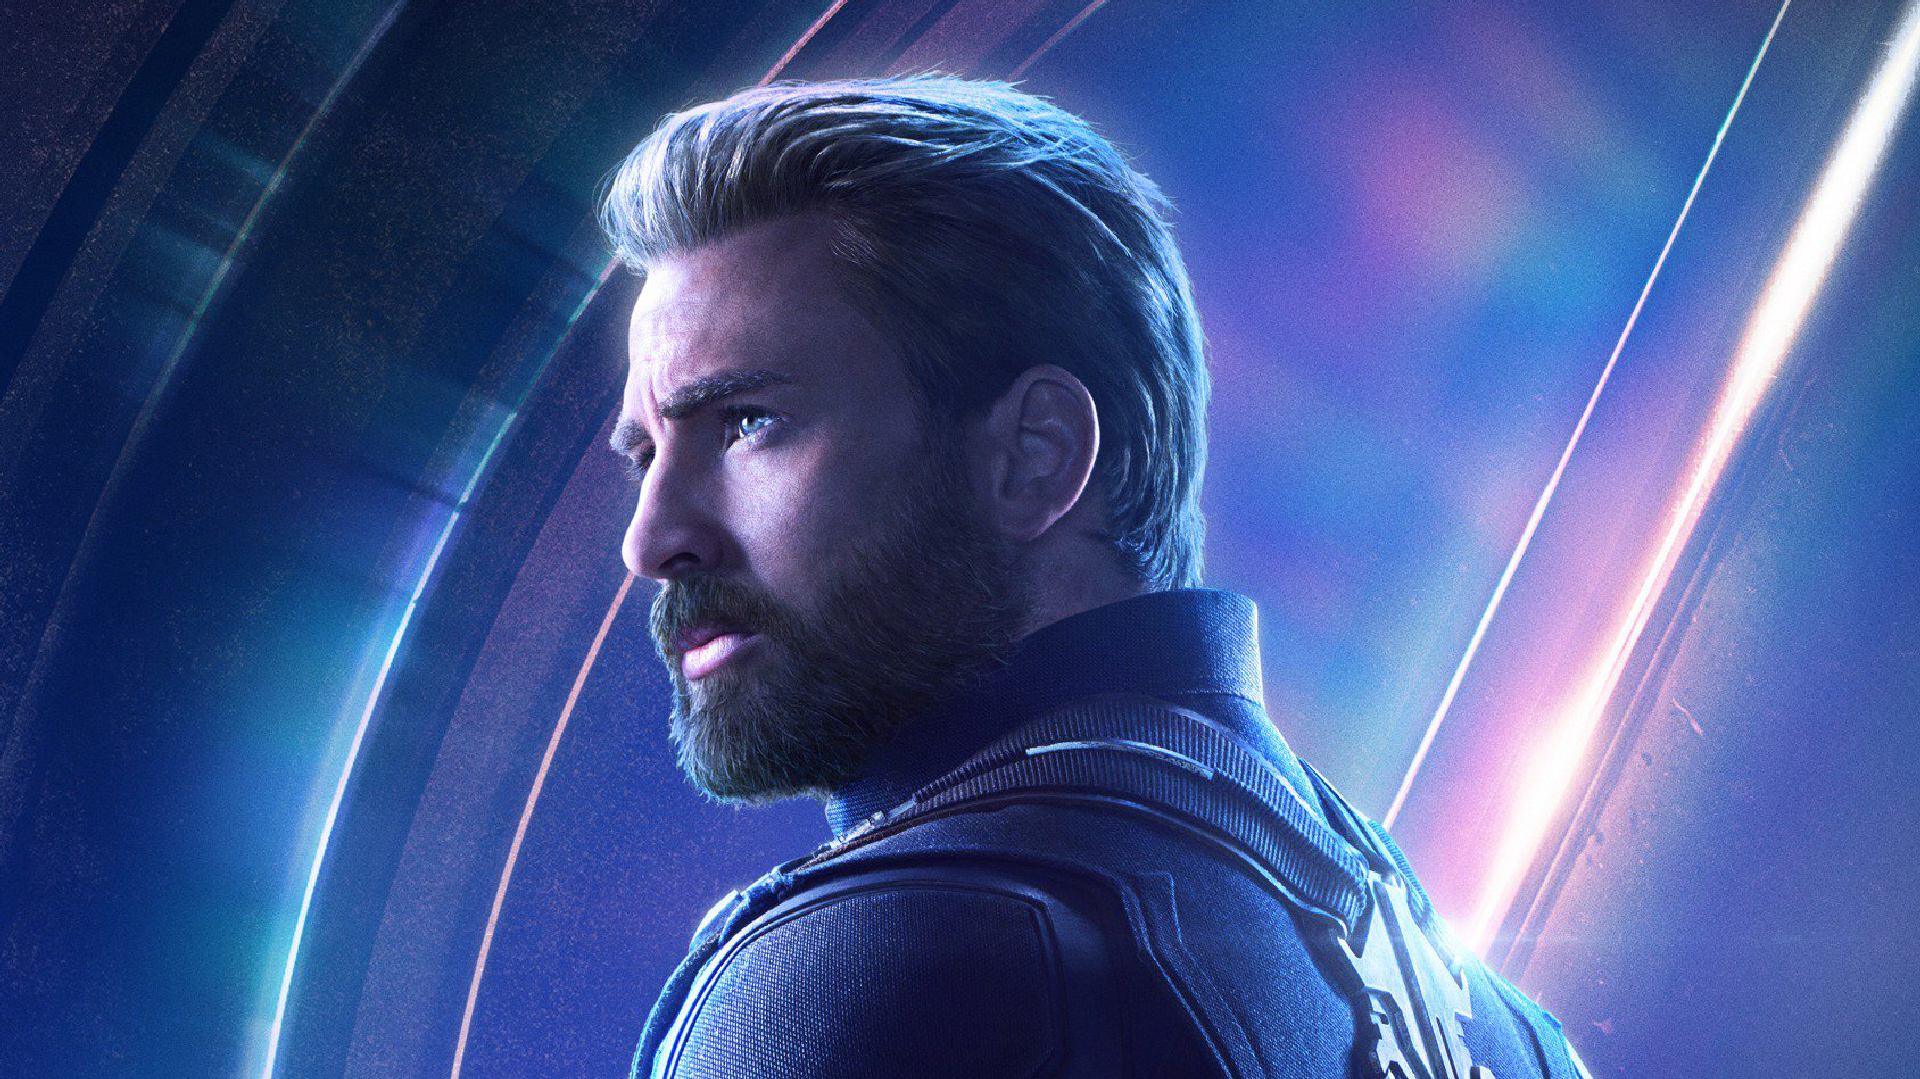 Captain America In Avengers Infinity War New Poster, HD 